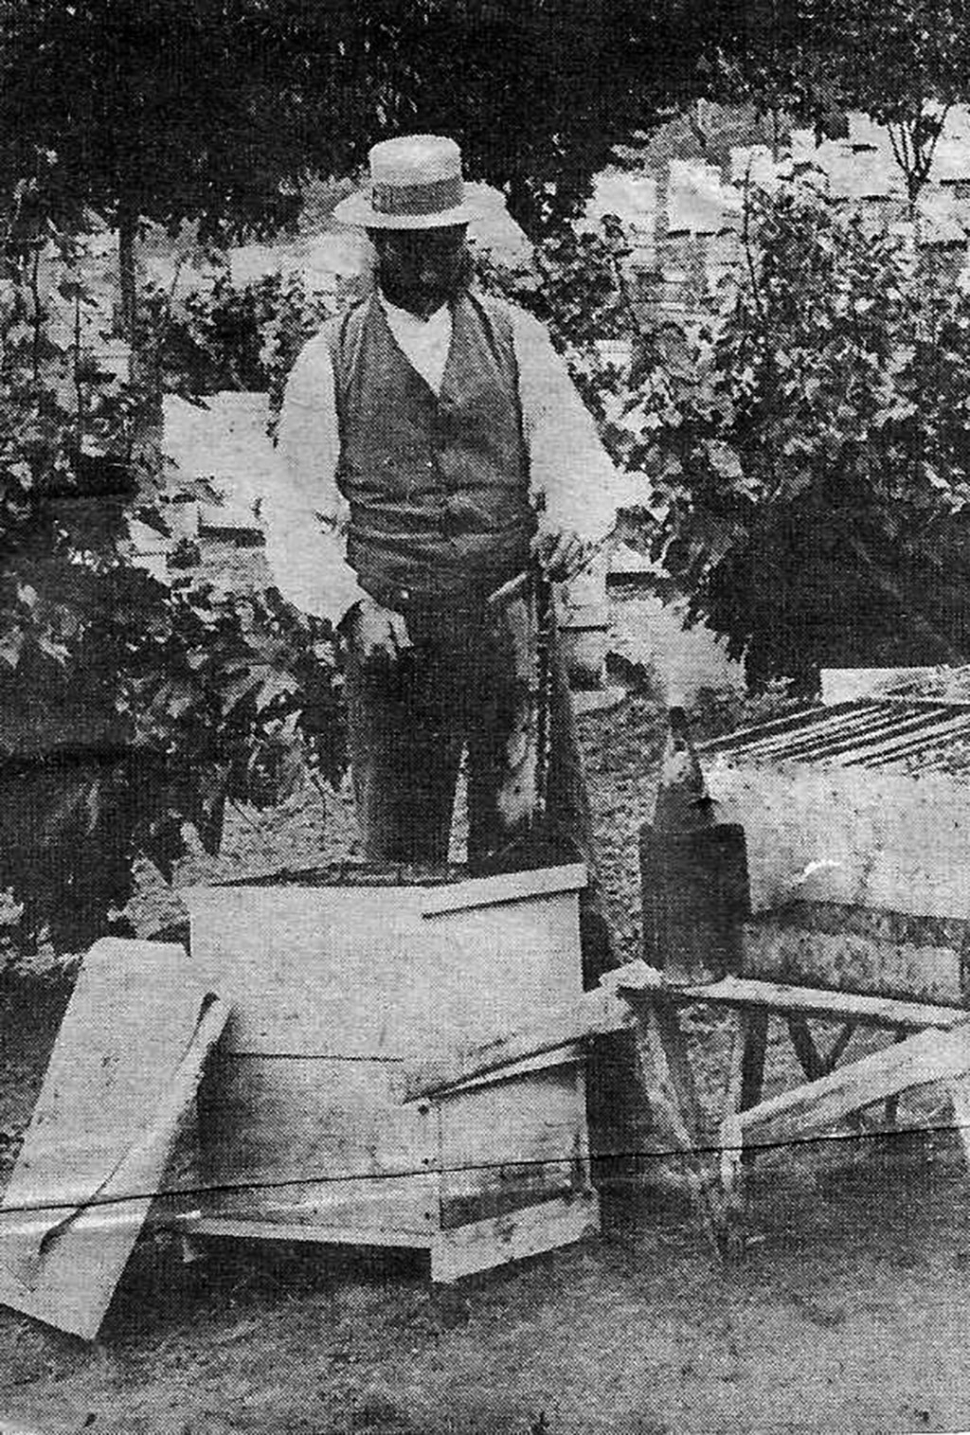 James F. Mclntyre in the 1900’s smoking his bee hives. Photos courtesy Fillmore Historical Museum.